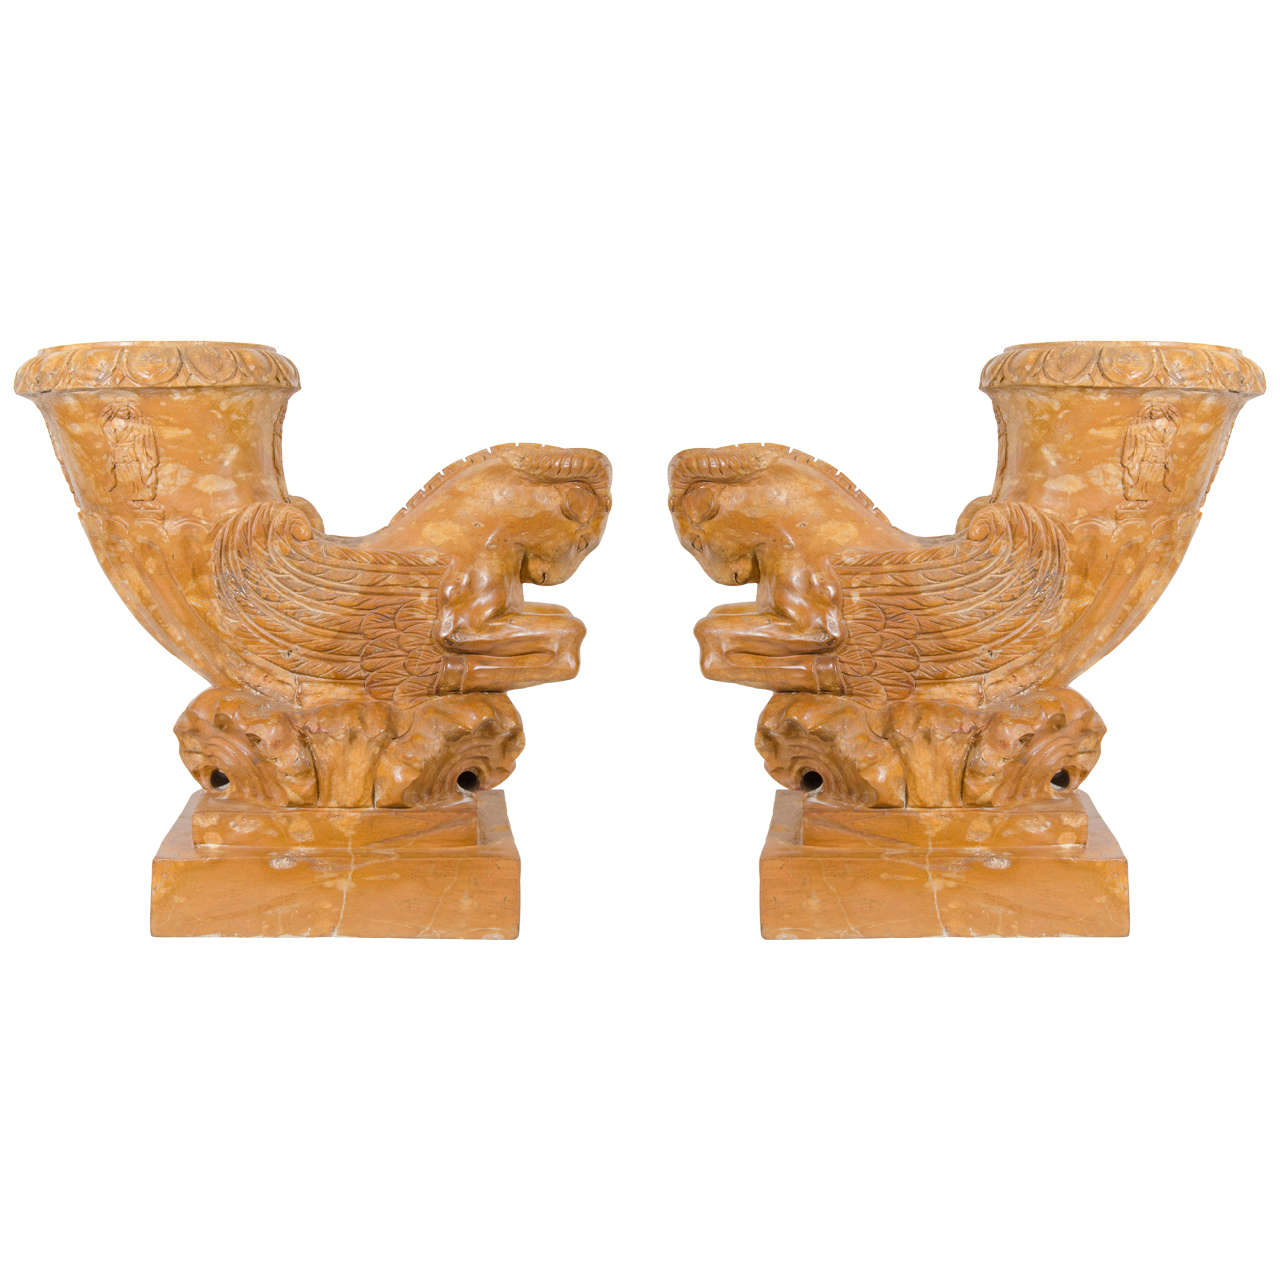 20th Century Pair of Neoclassical Style Mythological Marble Urns